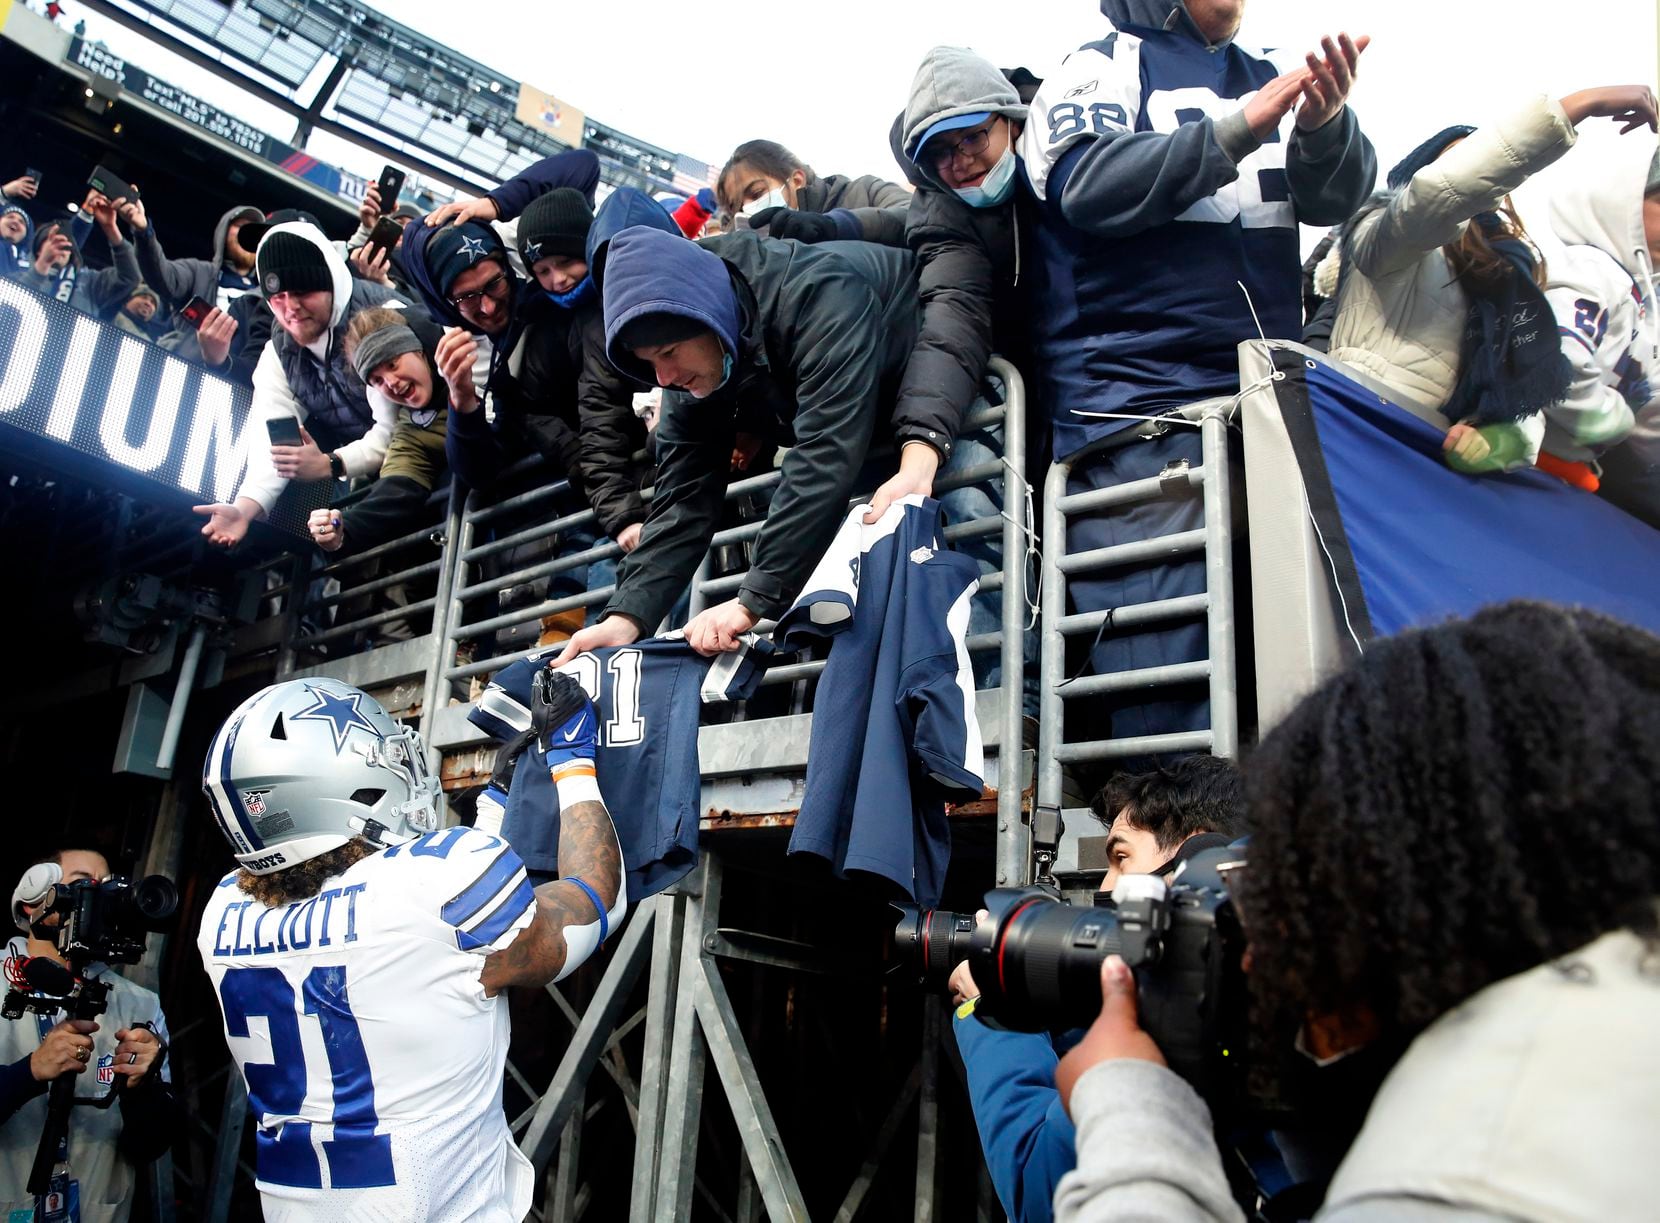 Even on the road, the Cowboys often attract a legion of fans. In December, running back Ezekiel Elliott signed autographs after the Cowboys' win against the New York Giants at MetLife Stadium in East Rutherford, N.J.